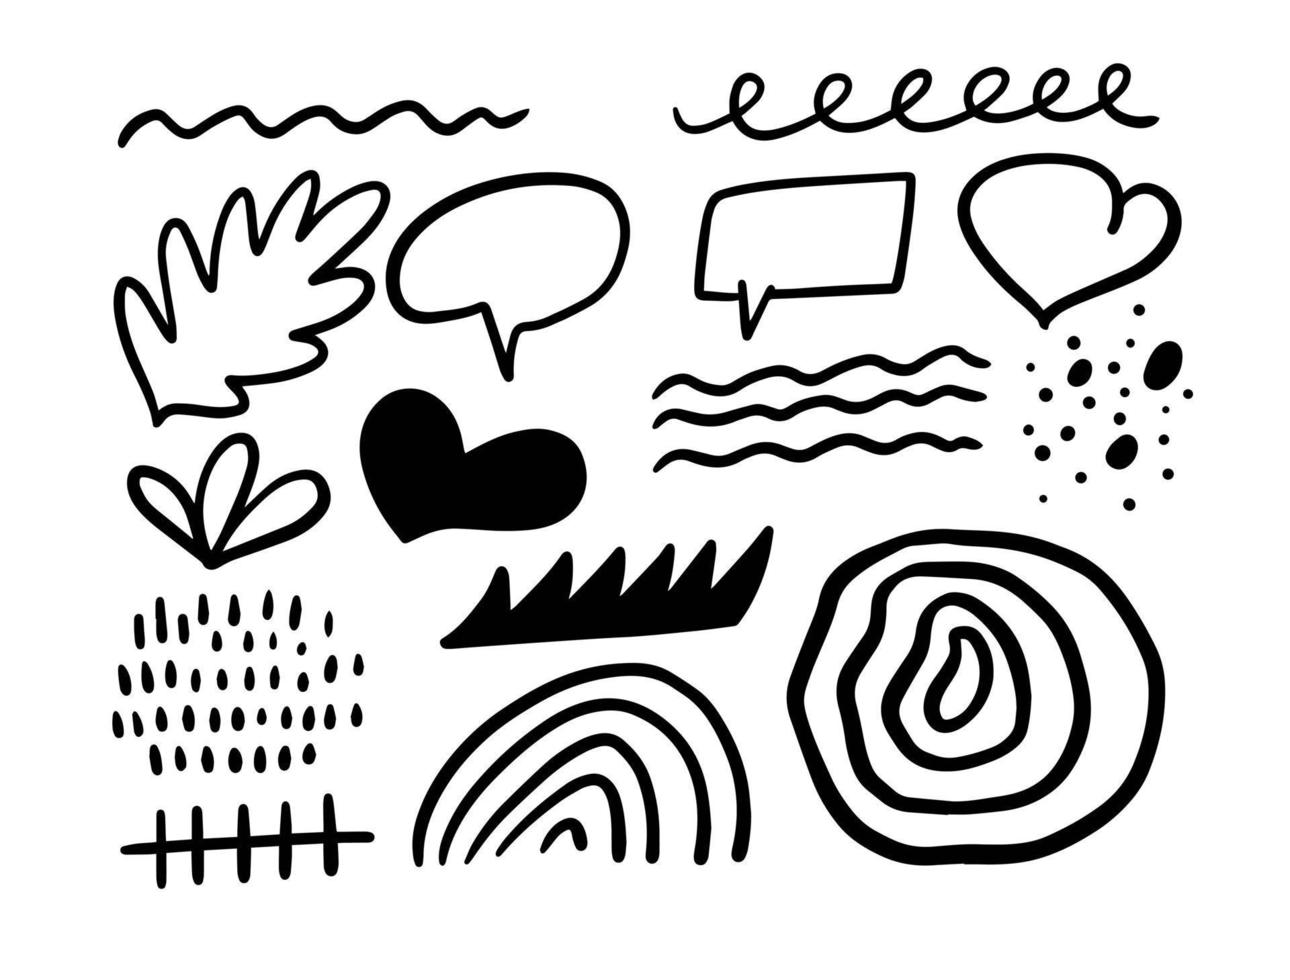 Hand drawn black color abstract objects set. Vector doodle style.